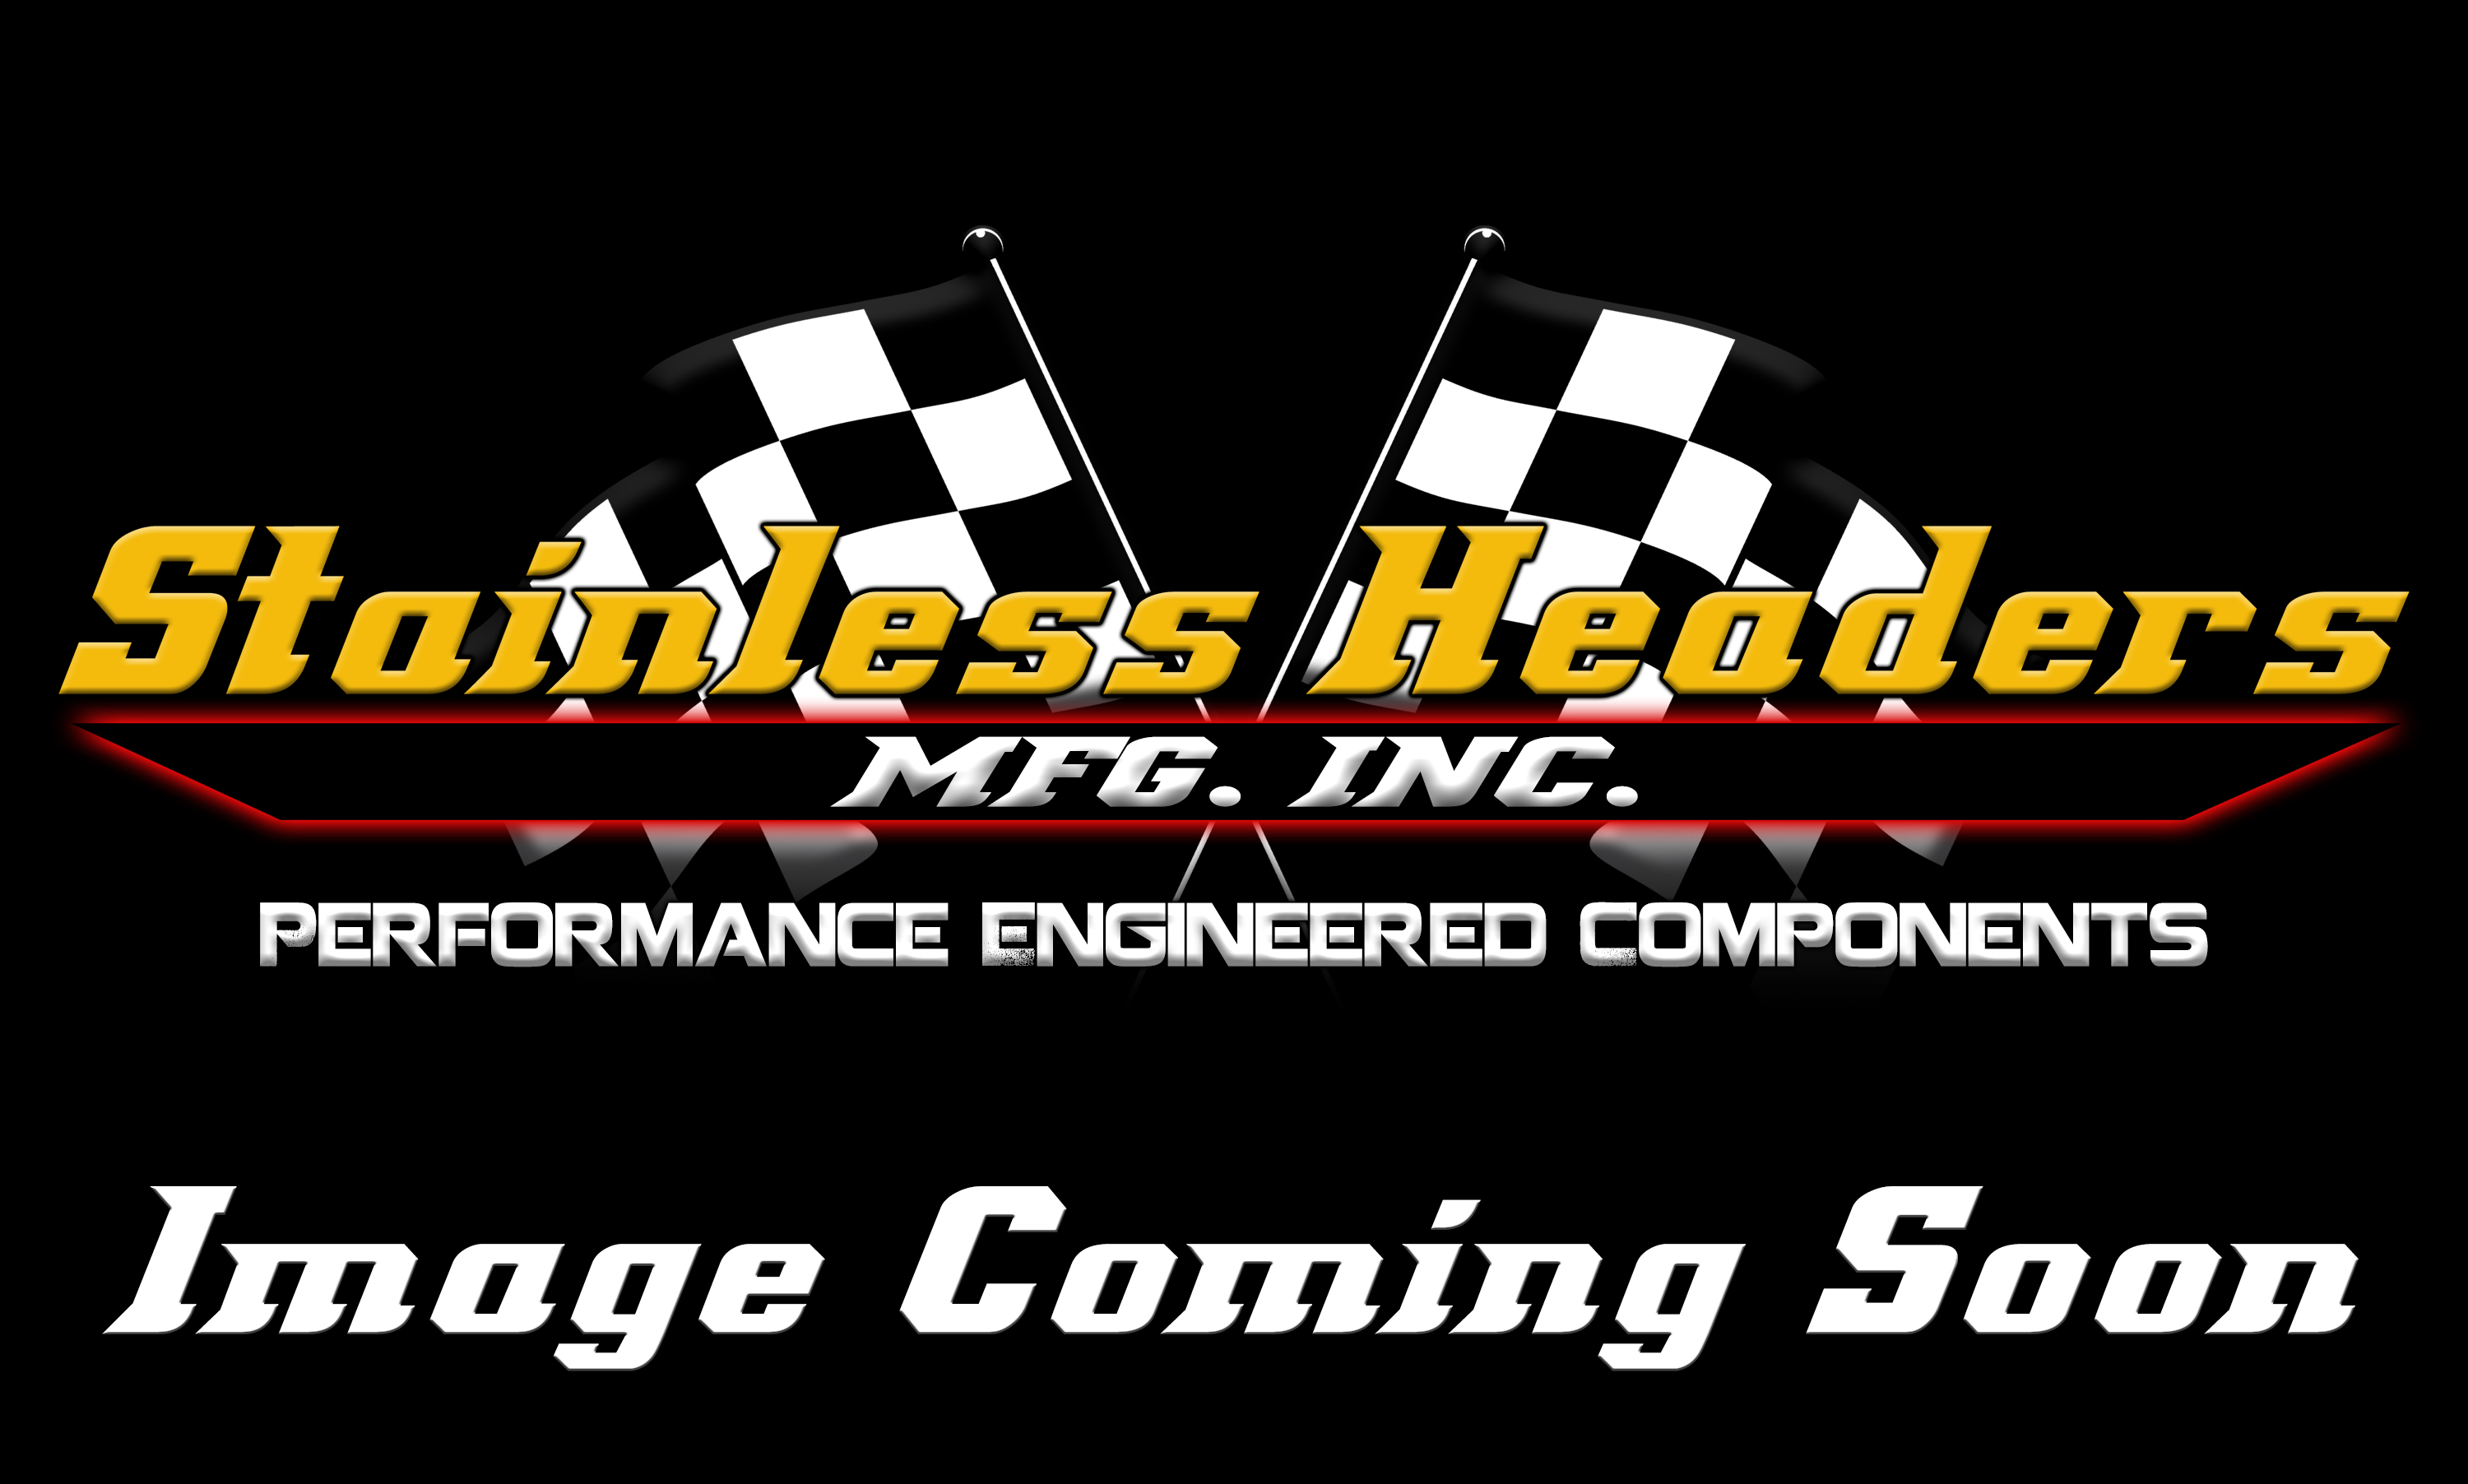 Stainless Headers - 1 1/2" Primary 3 into 1 Performance Merge Collector-16ga Mild Steel